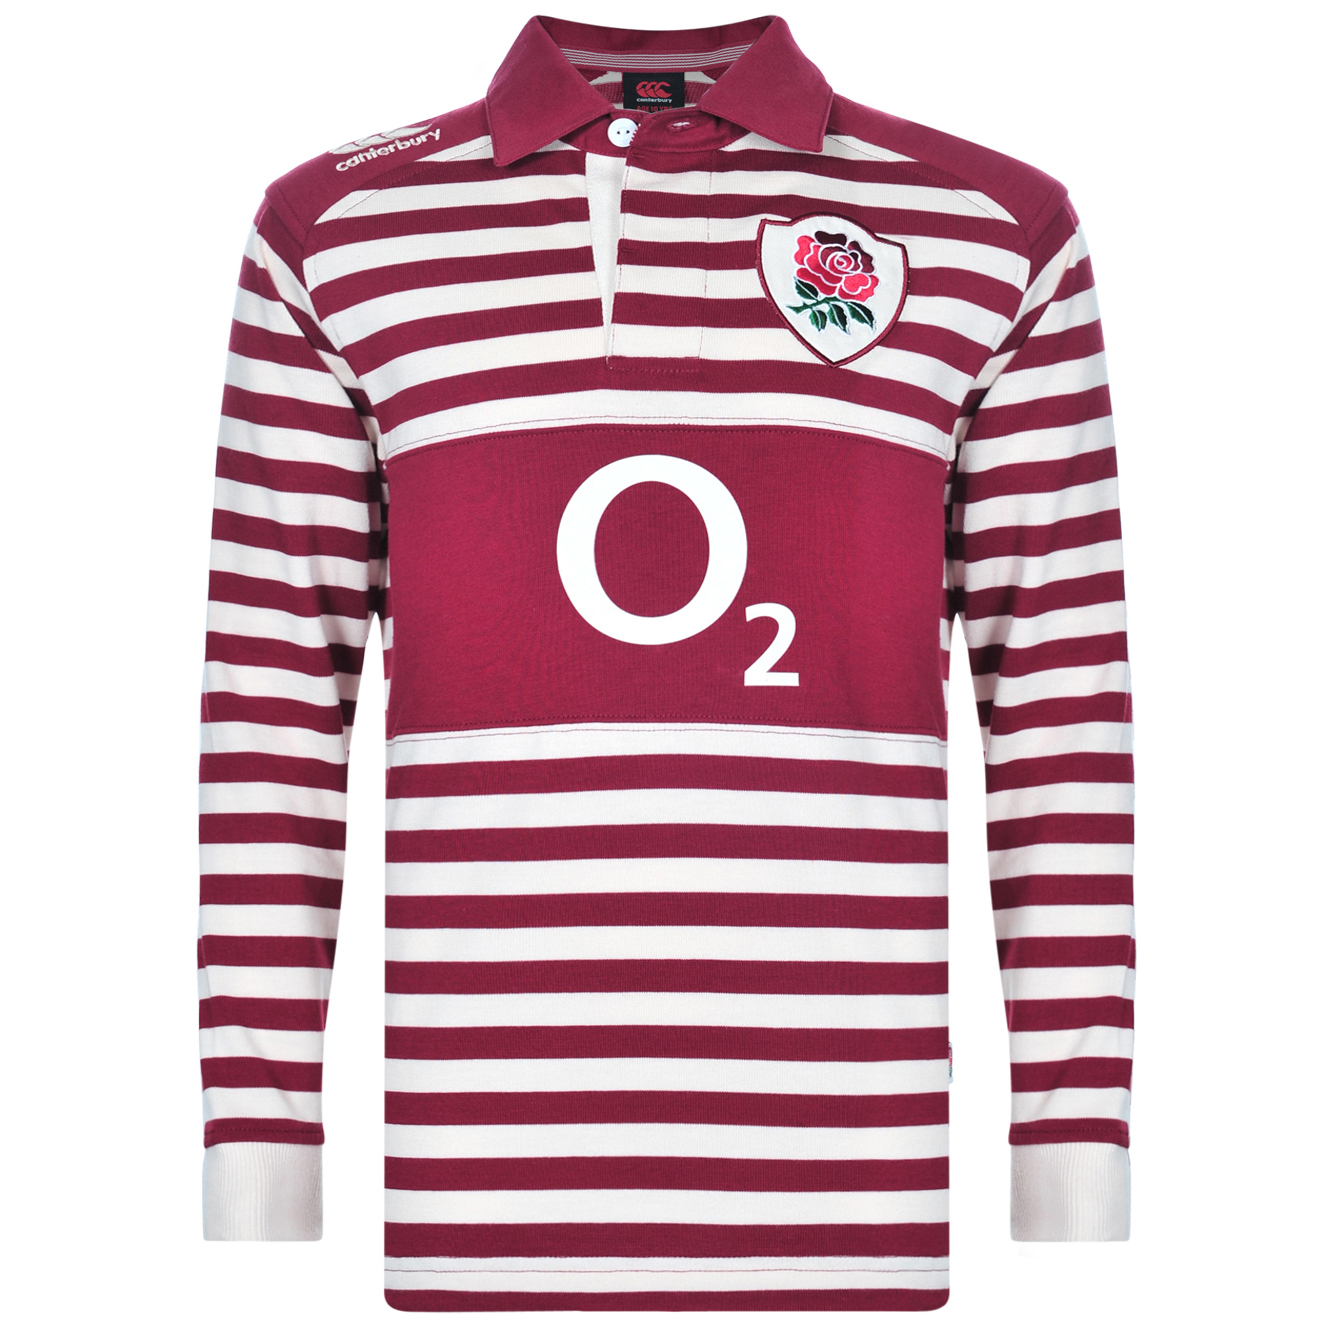 England Alternate Rugby Classic Shirt 2013/14 - Long Sleeve